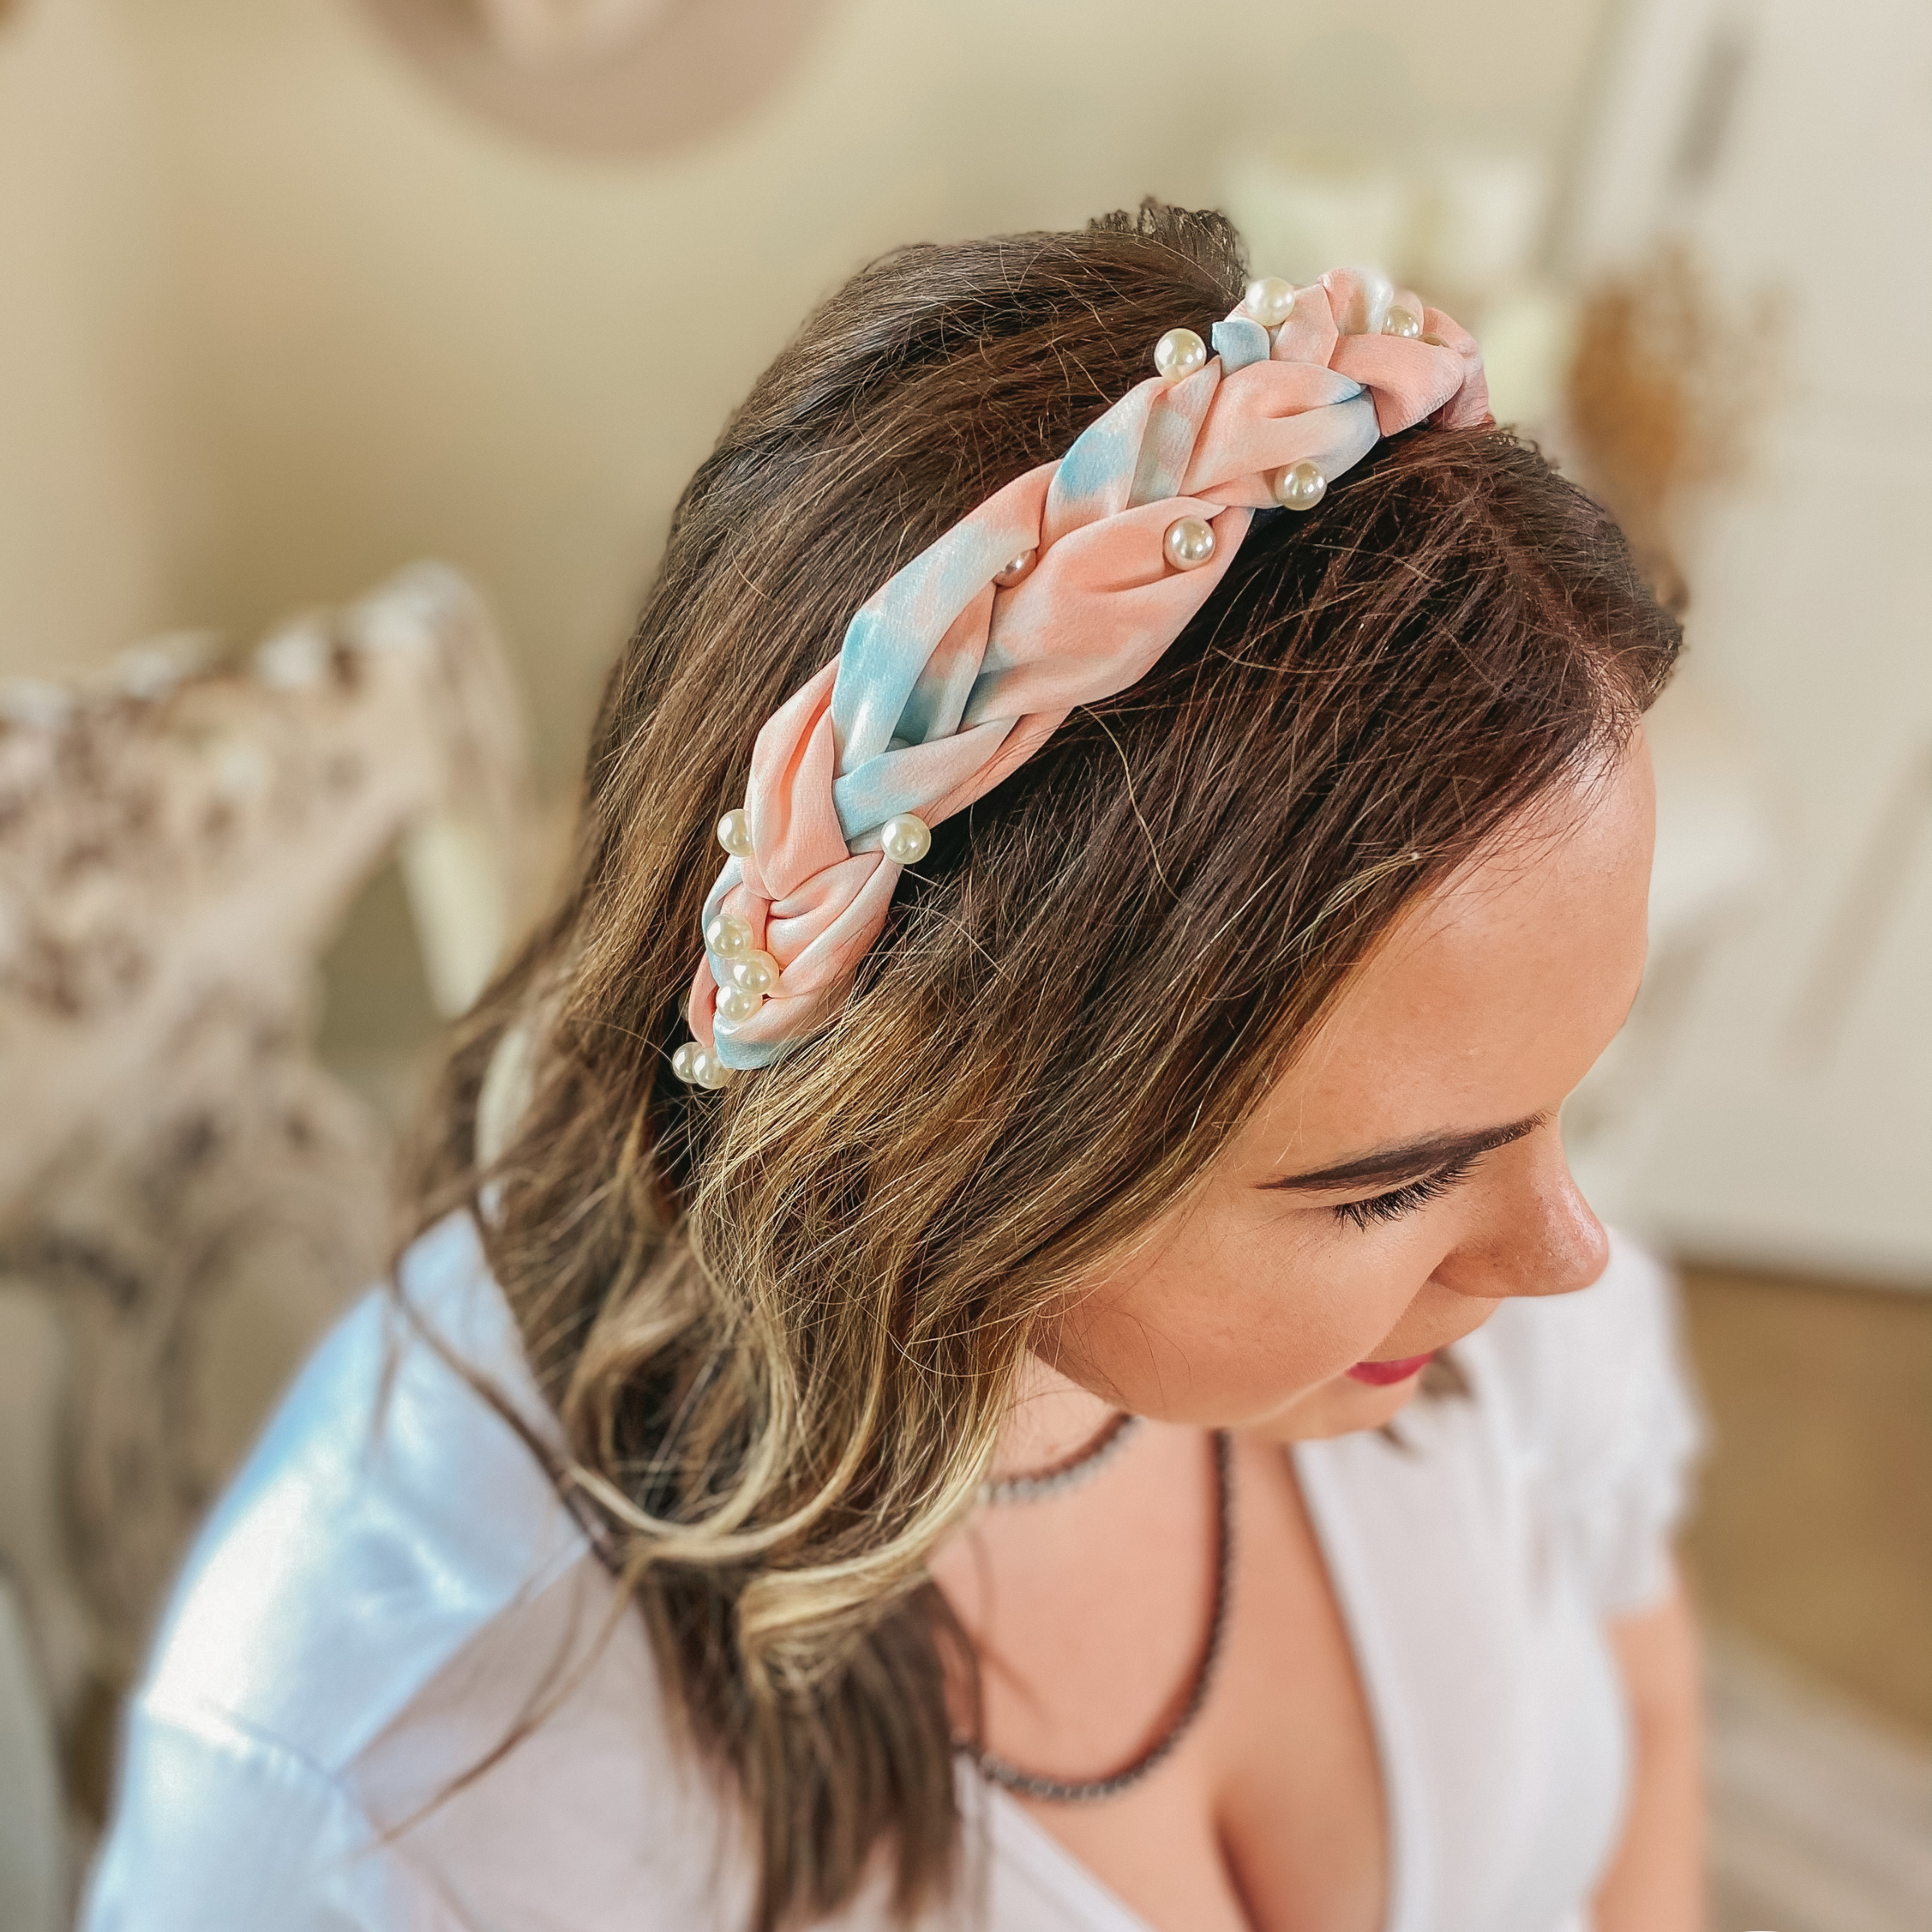 Pearl Detailed Braided Headband in Pink and Blue Tie Dye - Giddy Up Glamour Boutique